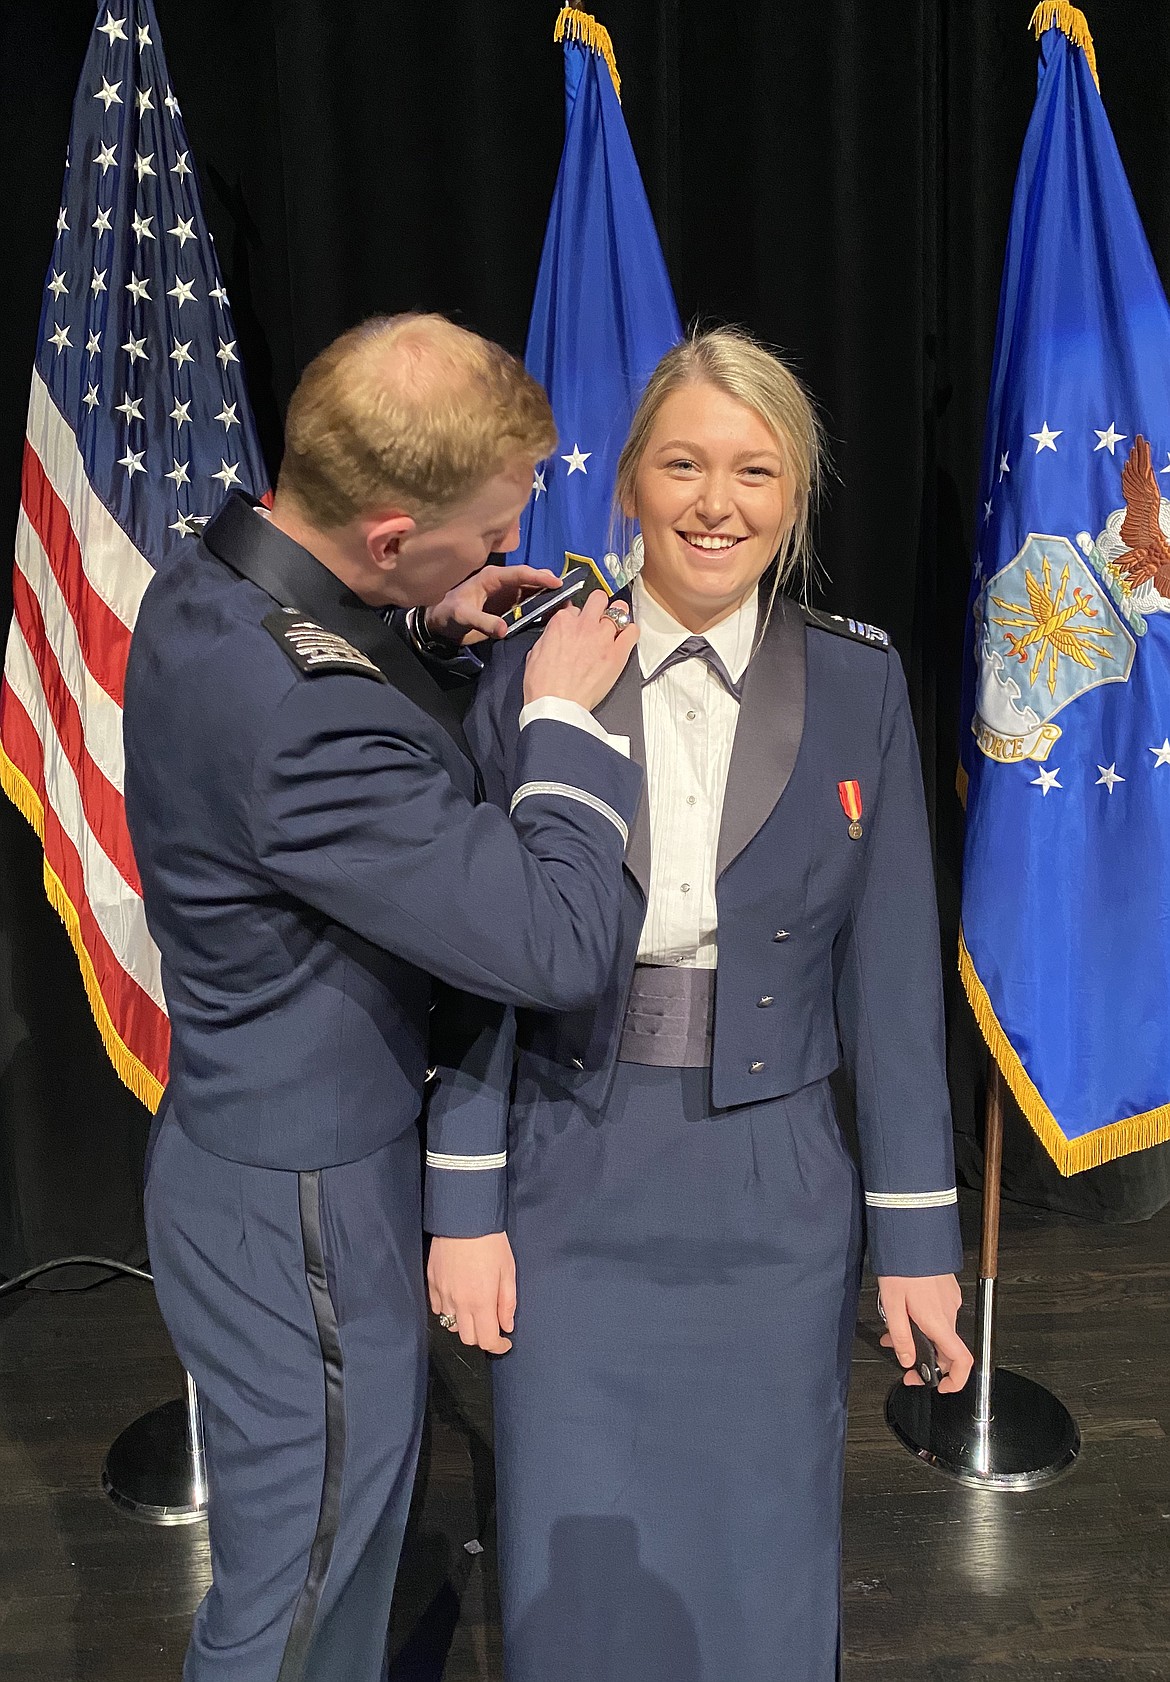 Brenden May pins United States Air Force Academy graduate Erin Hague with her second lieutenant rank after being commissioned as an officer in April. "It is typical that you would have your family or people who mean something to do that for you when you promote," Hague explained. "Because our families couldn't be there, we chose out of our close friends at school. Brenden is actually my boyfriend and had commissioned that same day. I pinned on his shoulder boards right after he pinned mine on." (Courtesy photo)